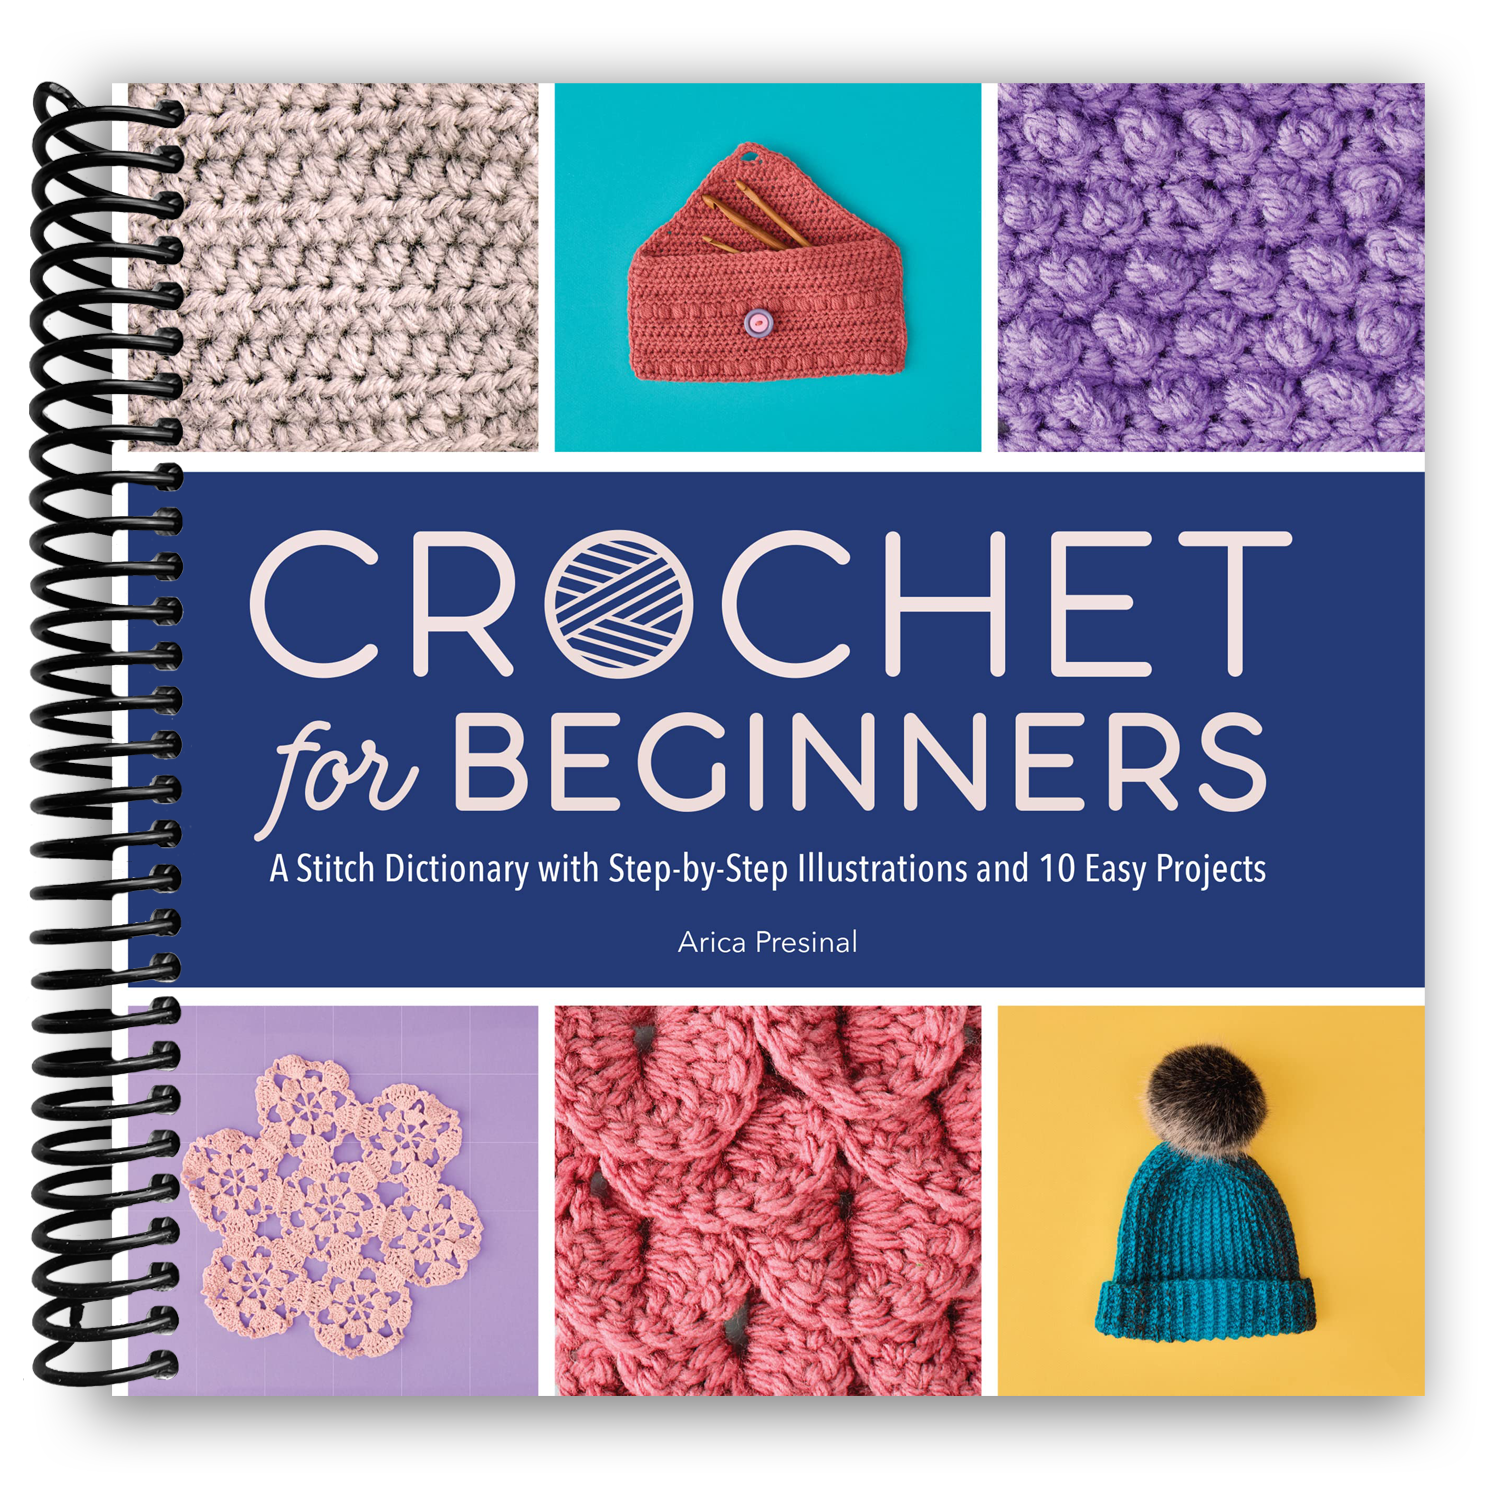 CROCHET FOR BEGINNERS - 2 BOOKS IN 1: The Most Complete Step-by-Step Guide  to Learn Crocheting Quickly and Easily with Pictures and Illustrations